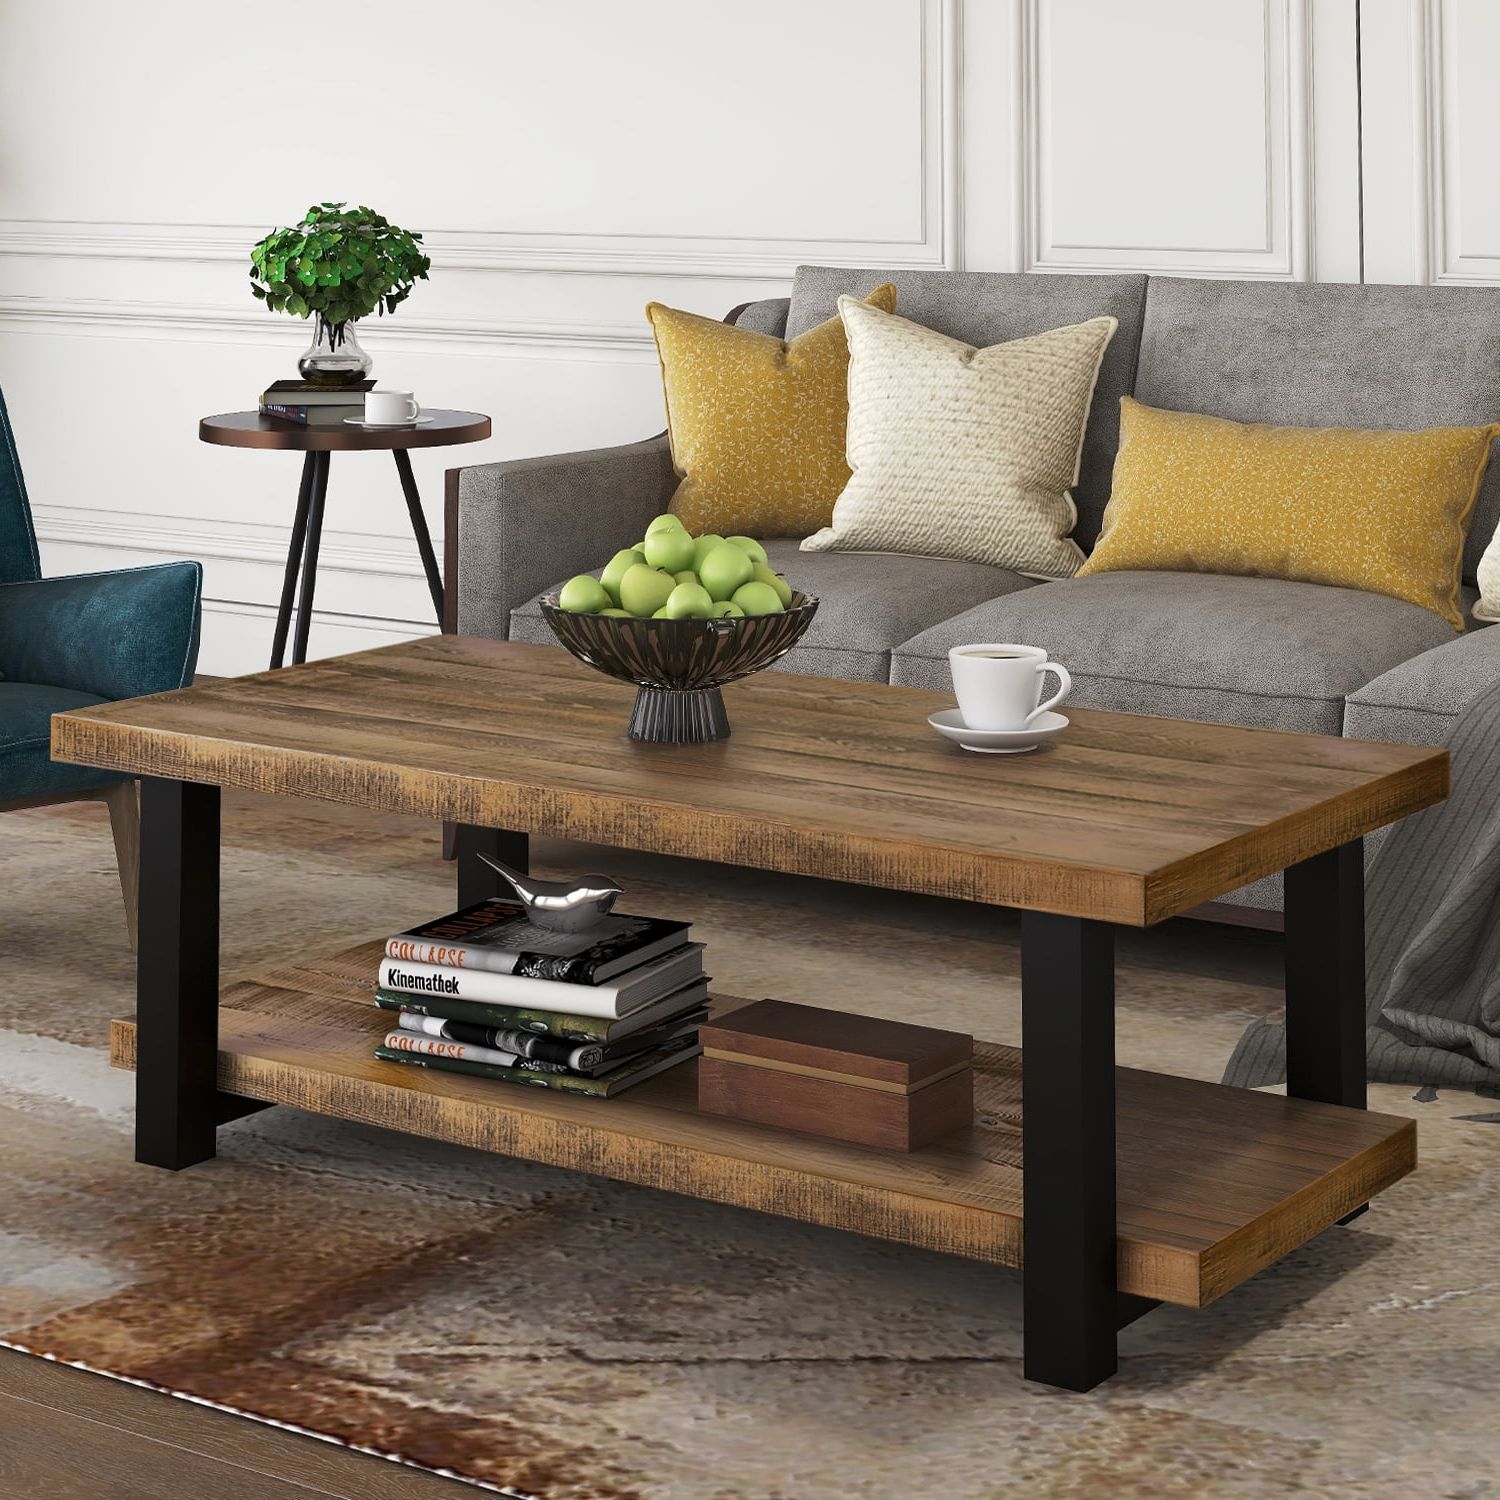 Most Recently Released Coffee Tables For 4 6 People In Black Rectangle Coffee Table With Shelf : Evelyn&zoe Contemporary Metal (View 13 of 15)